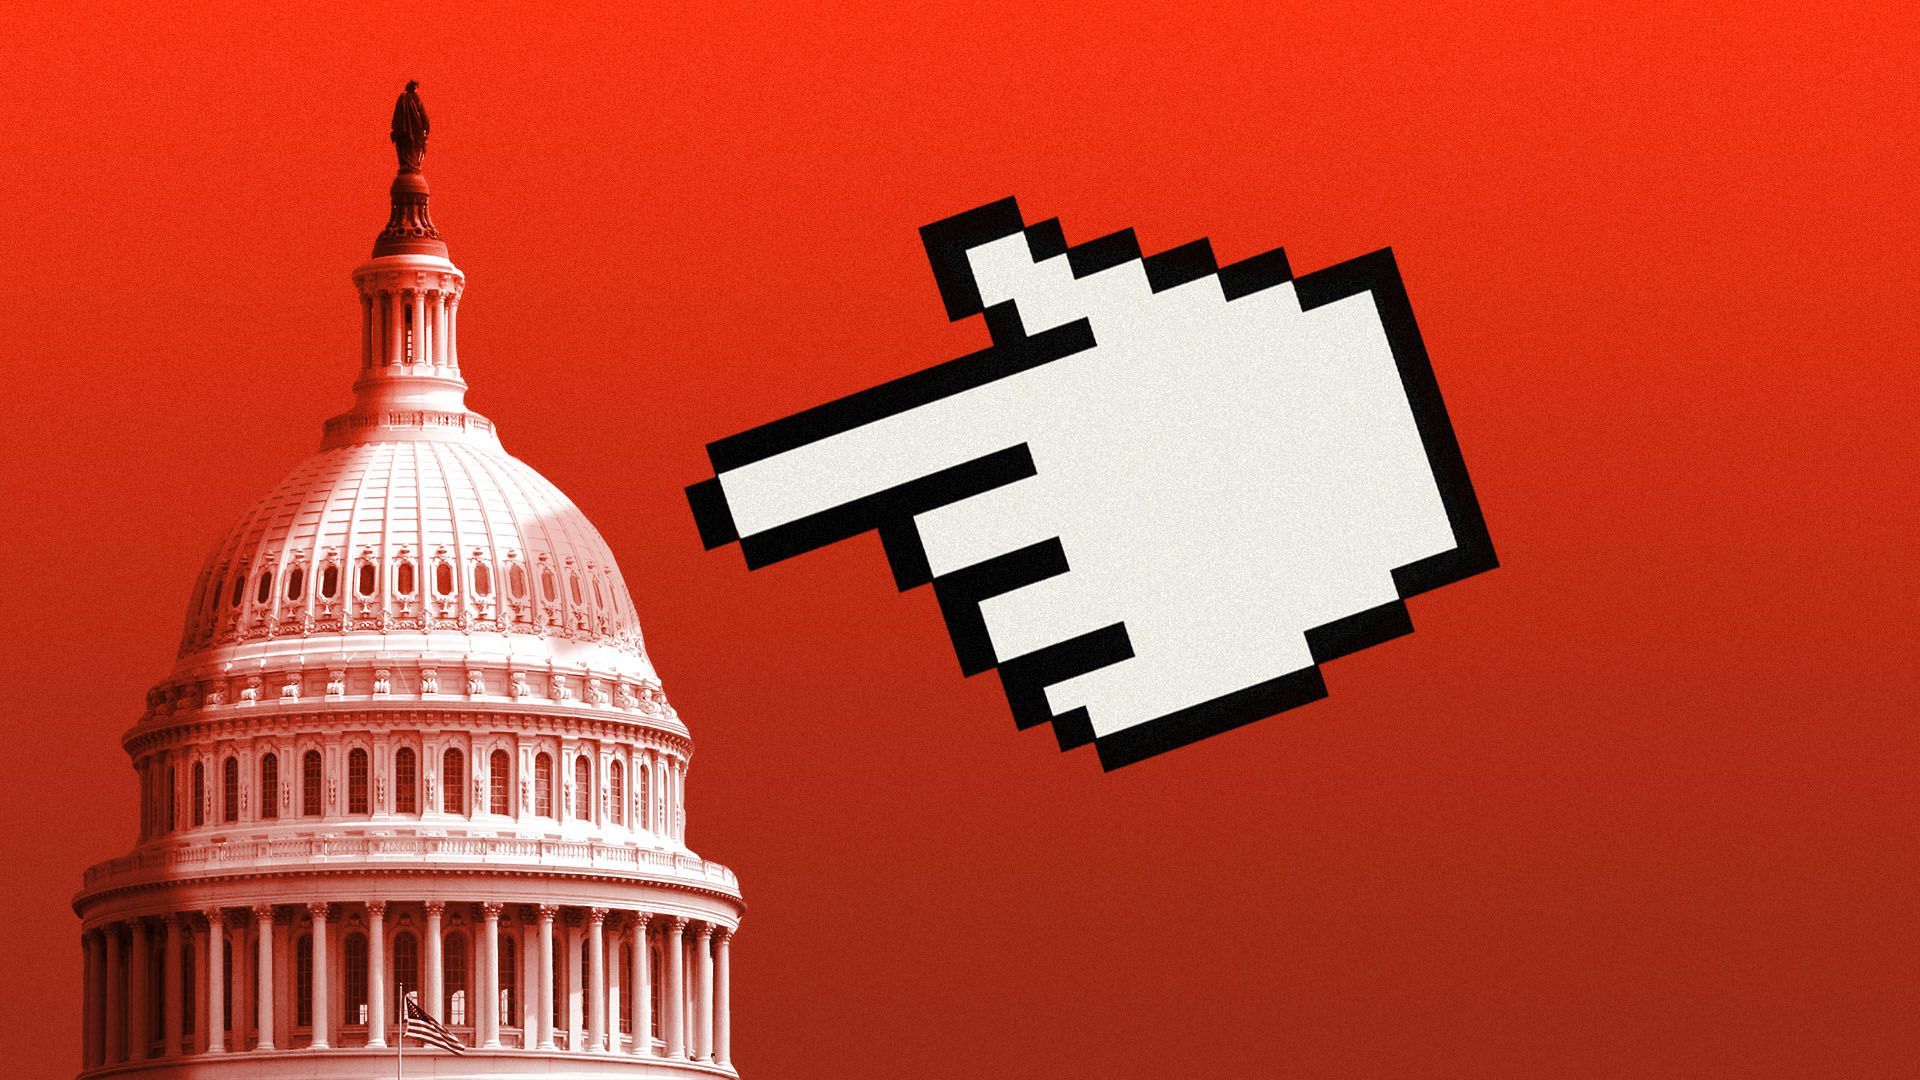 Illustration of a pointing finger cursor pointing at the Capitol dome